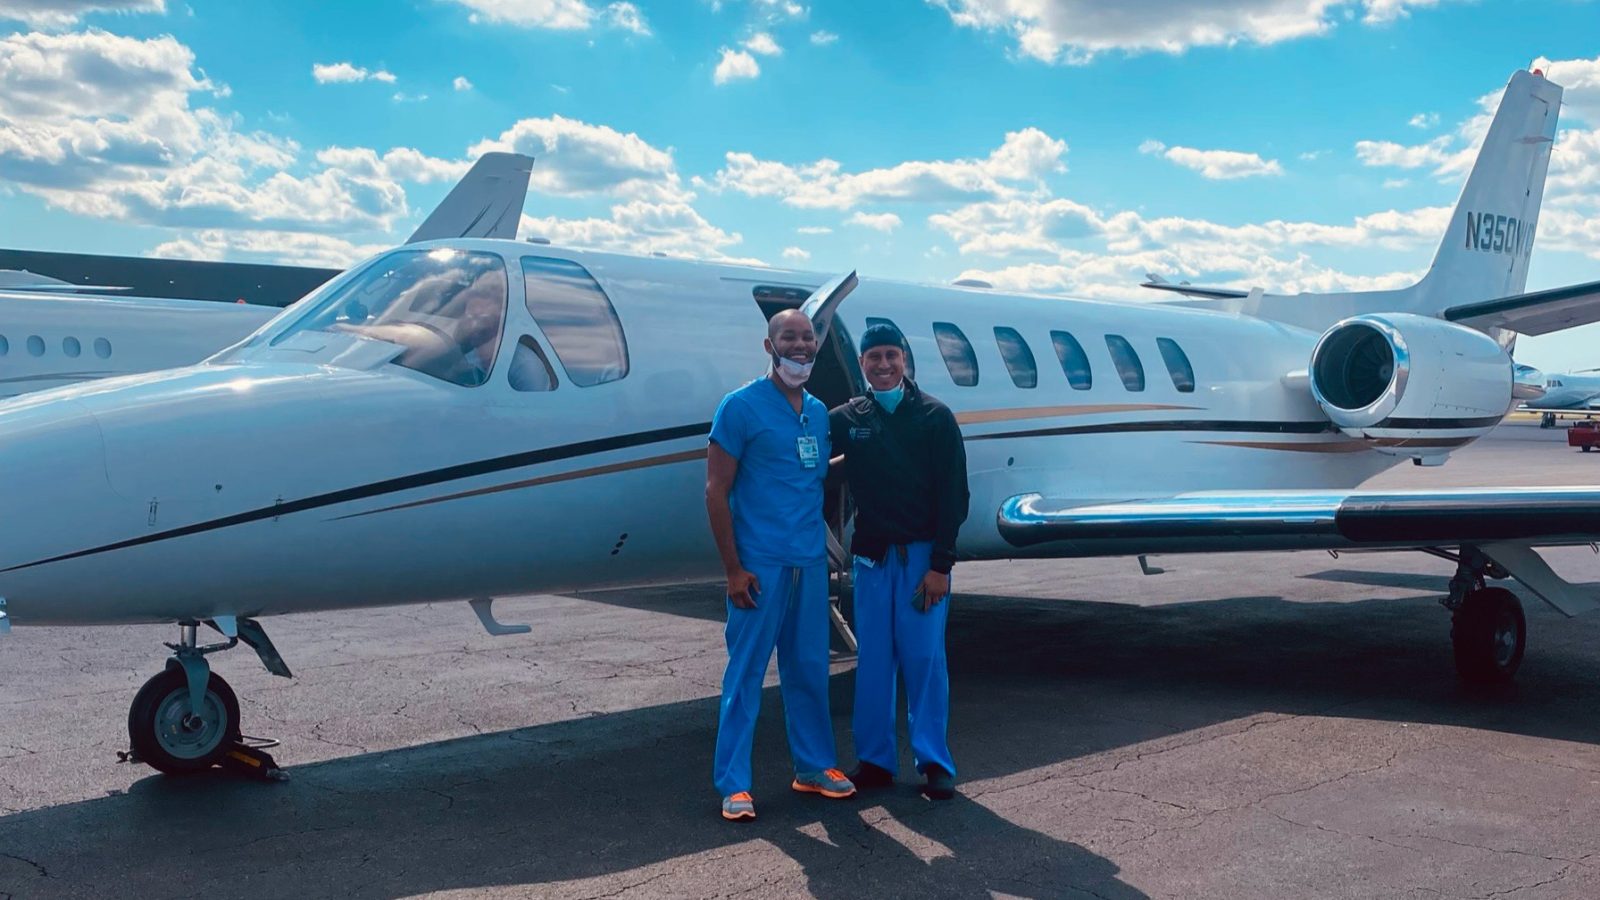 Malcolm standing with someone in front of a small plane while wearing doctor scrubs.